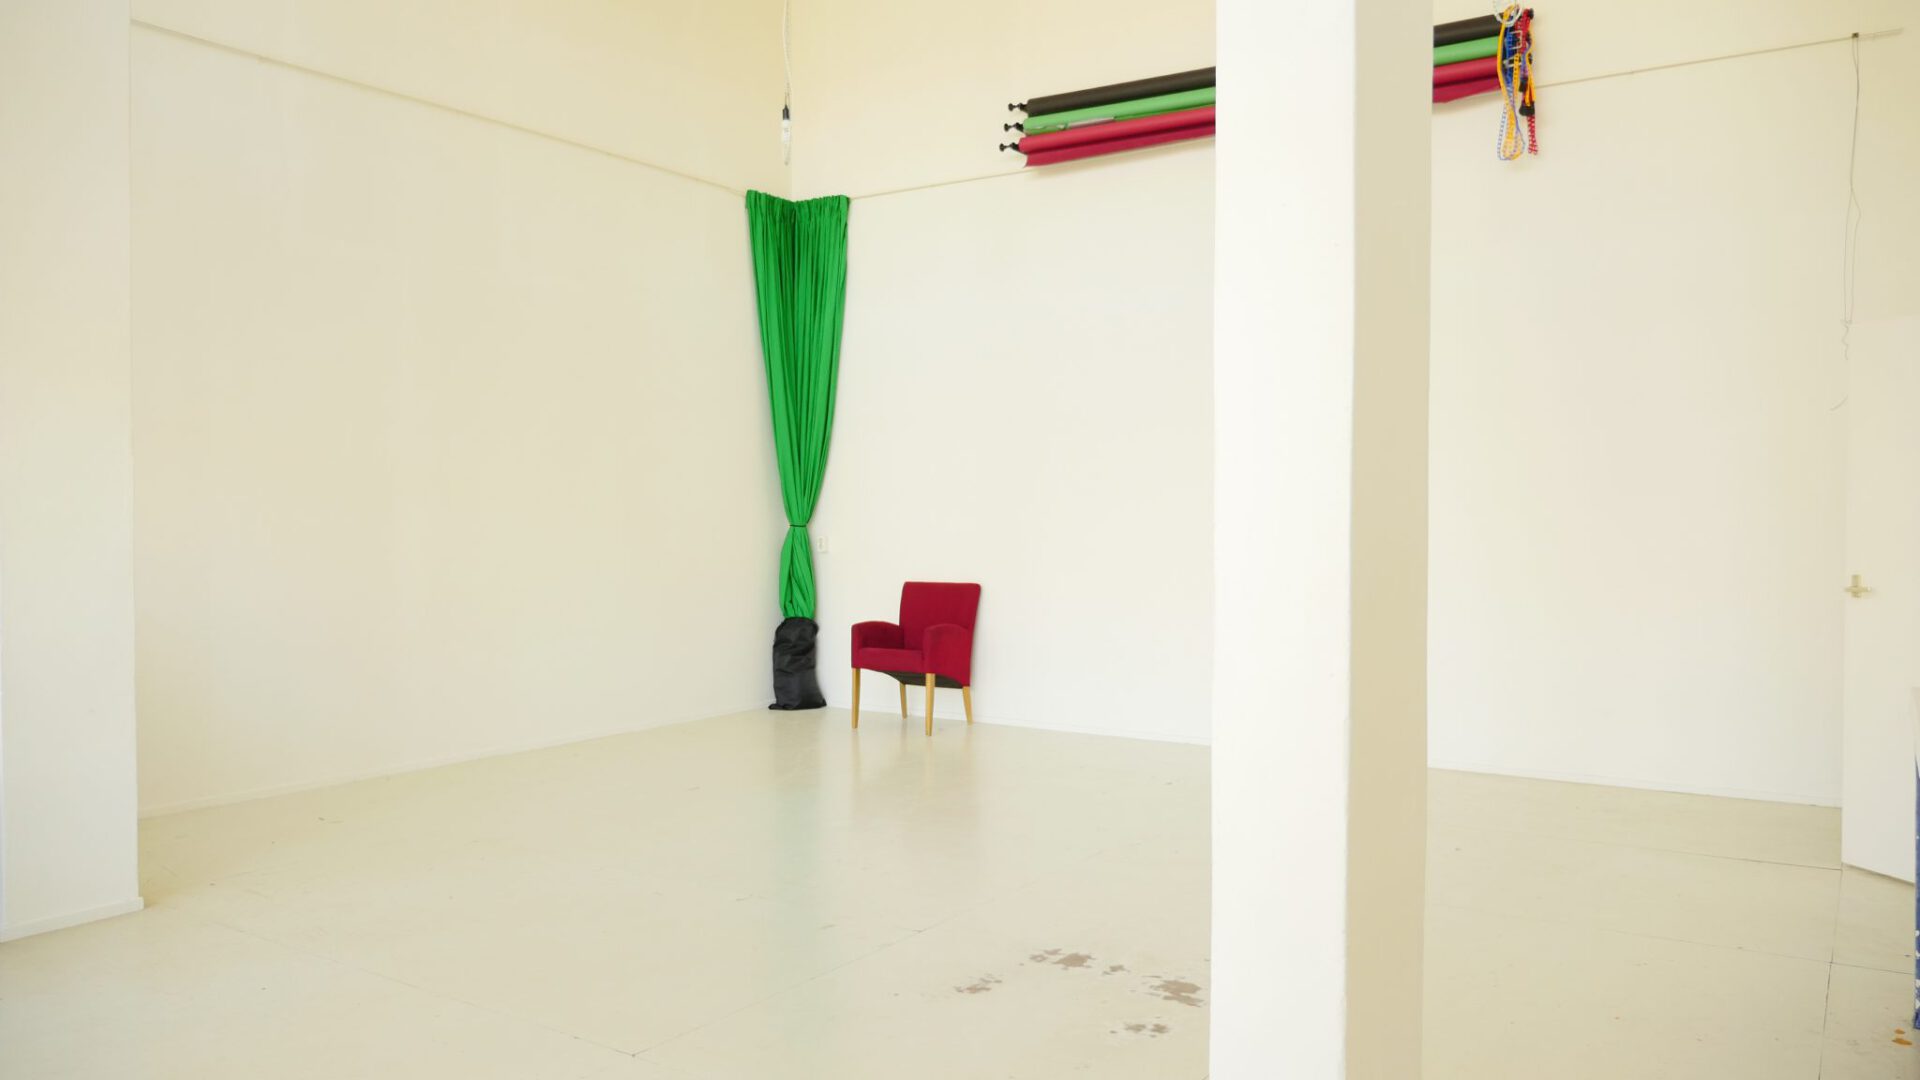 Large Green Screen Studio for video and photo shoots - Breed Art Studios Amsterdam Noord P1200288